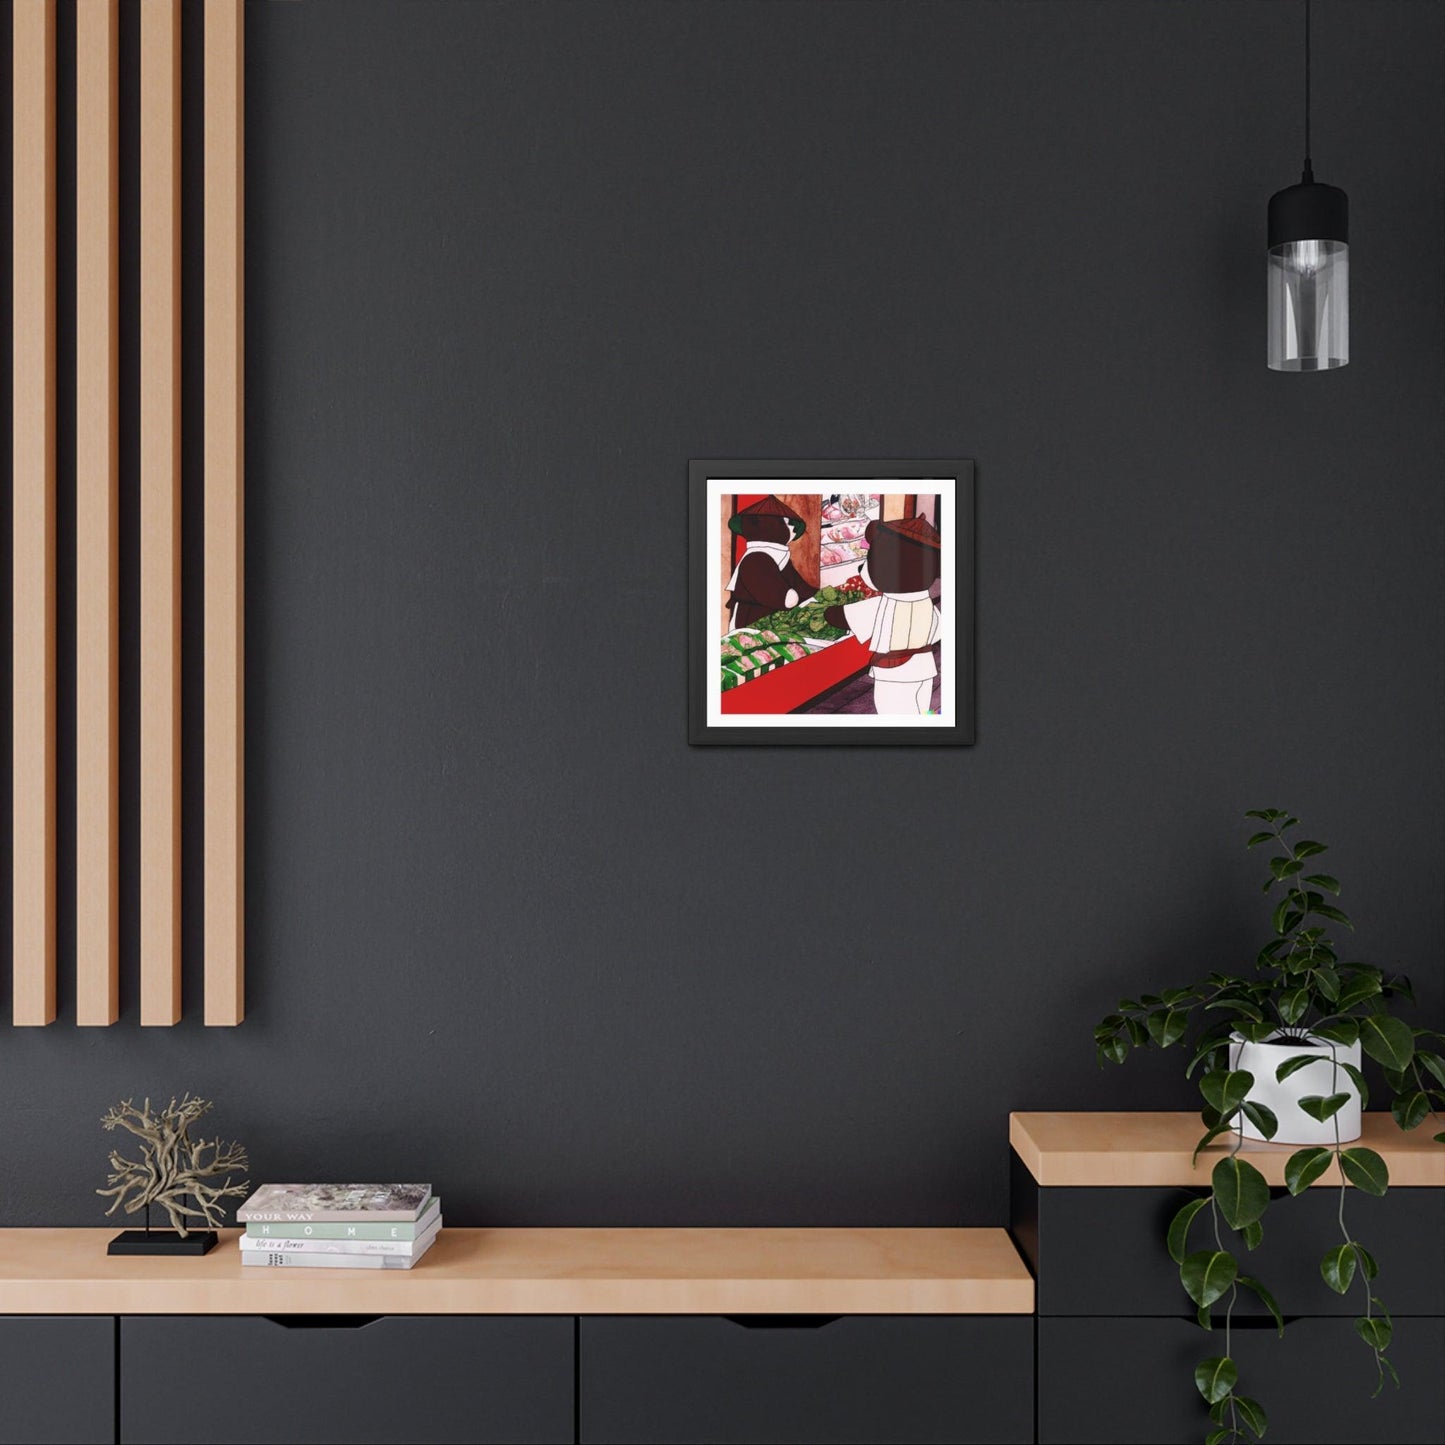 Pandas in Japanese Grocery Framed Poster Wall Art - MAIA HOMES